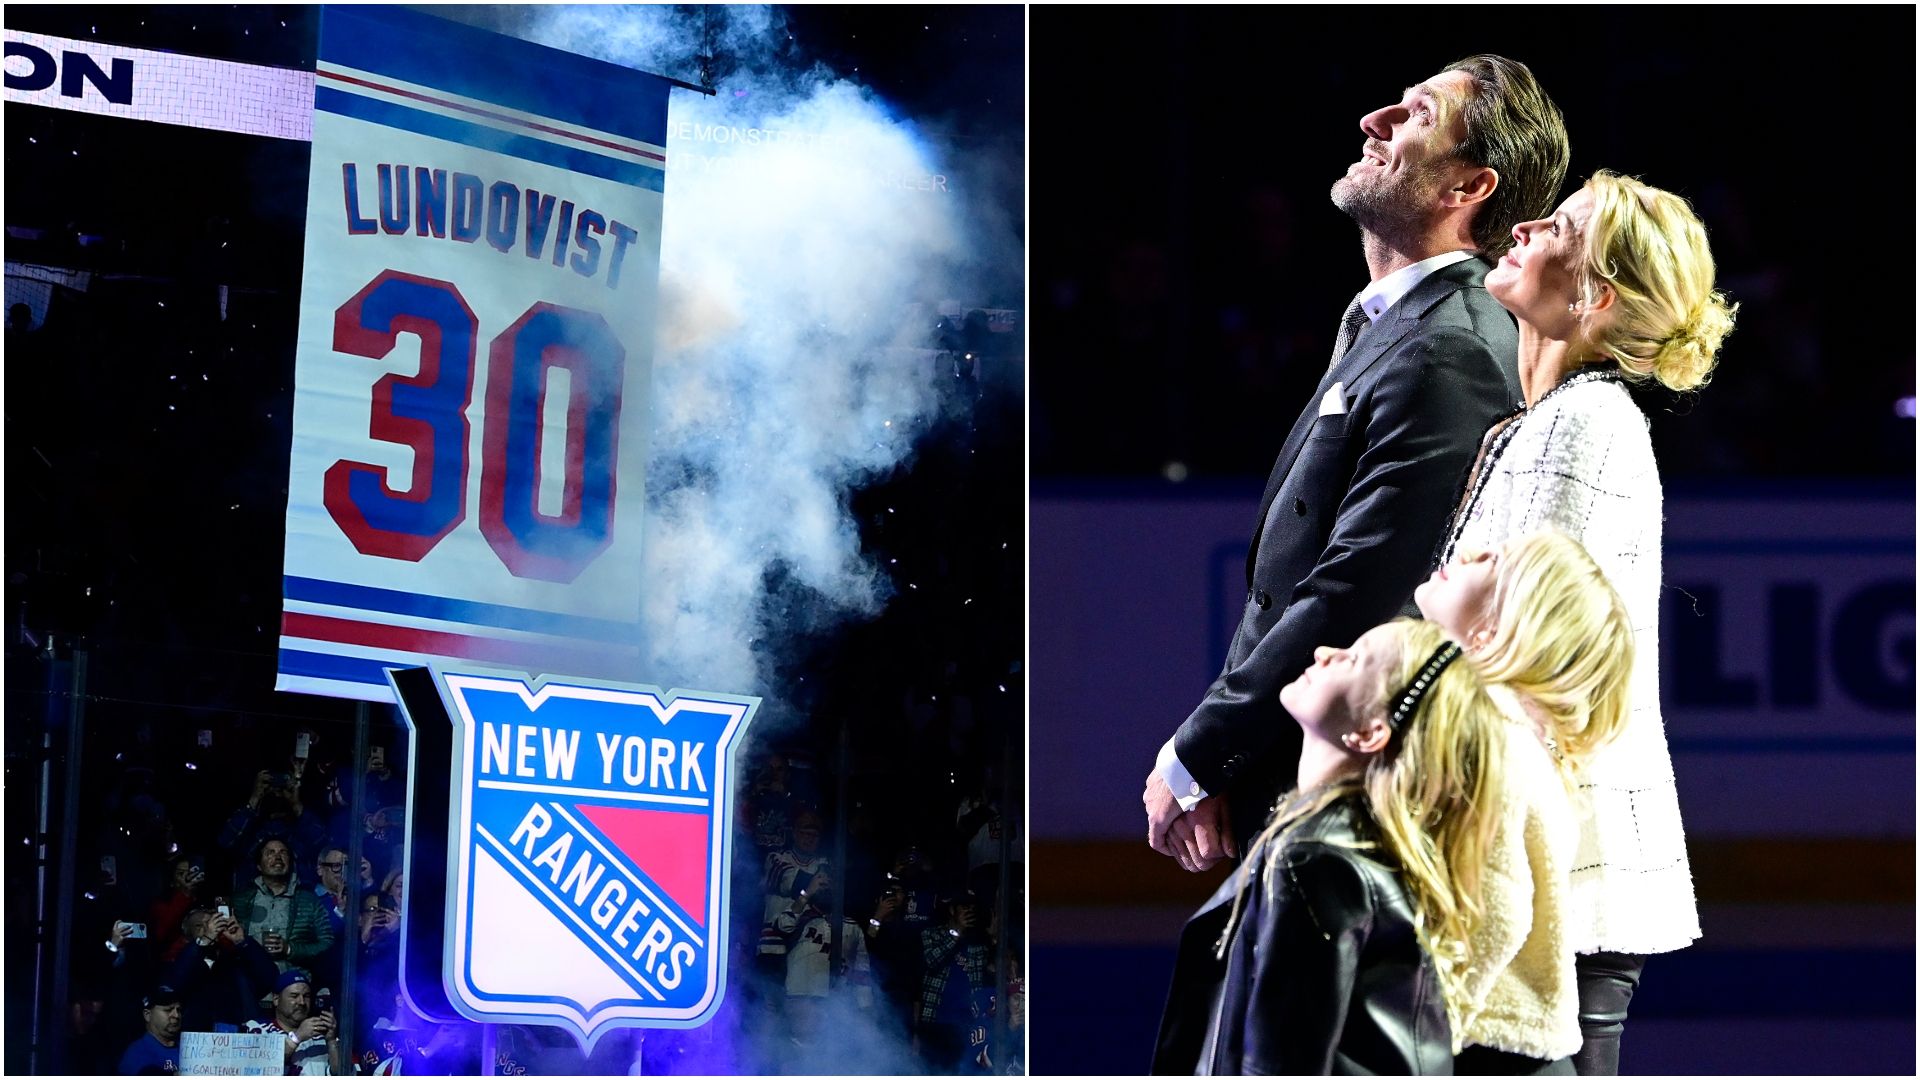 Henrik Lundqvist fan goes viral after collecting every jersey